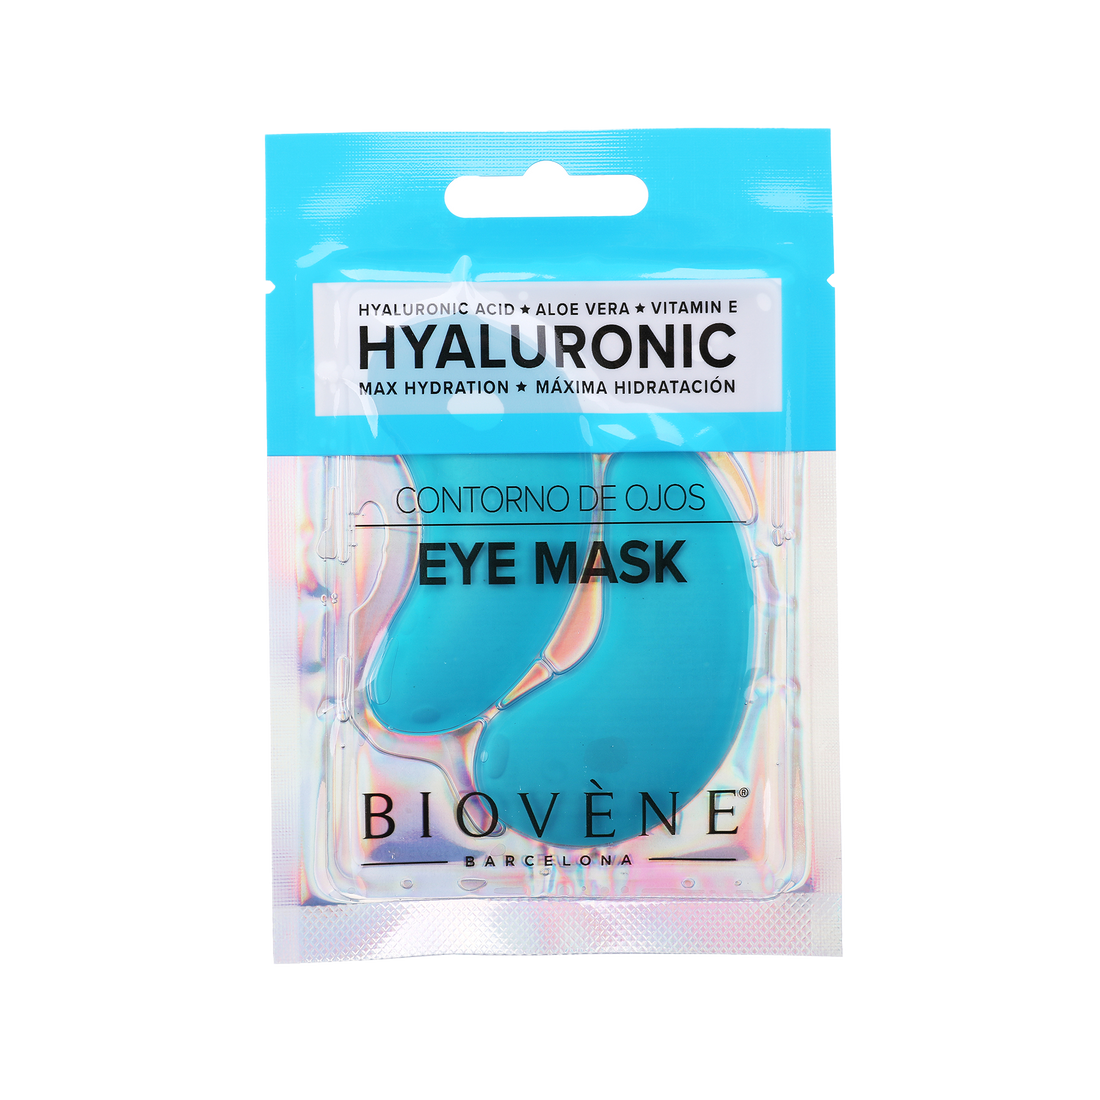 HYALURONIC ACID Max-Hydration Eye Pad Mask with Aloe Vera and Vitamin E